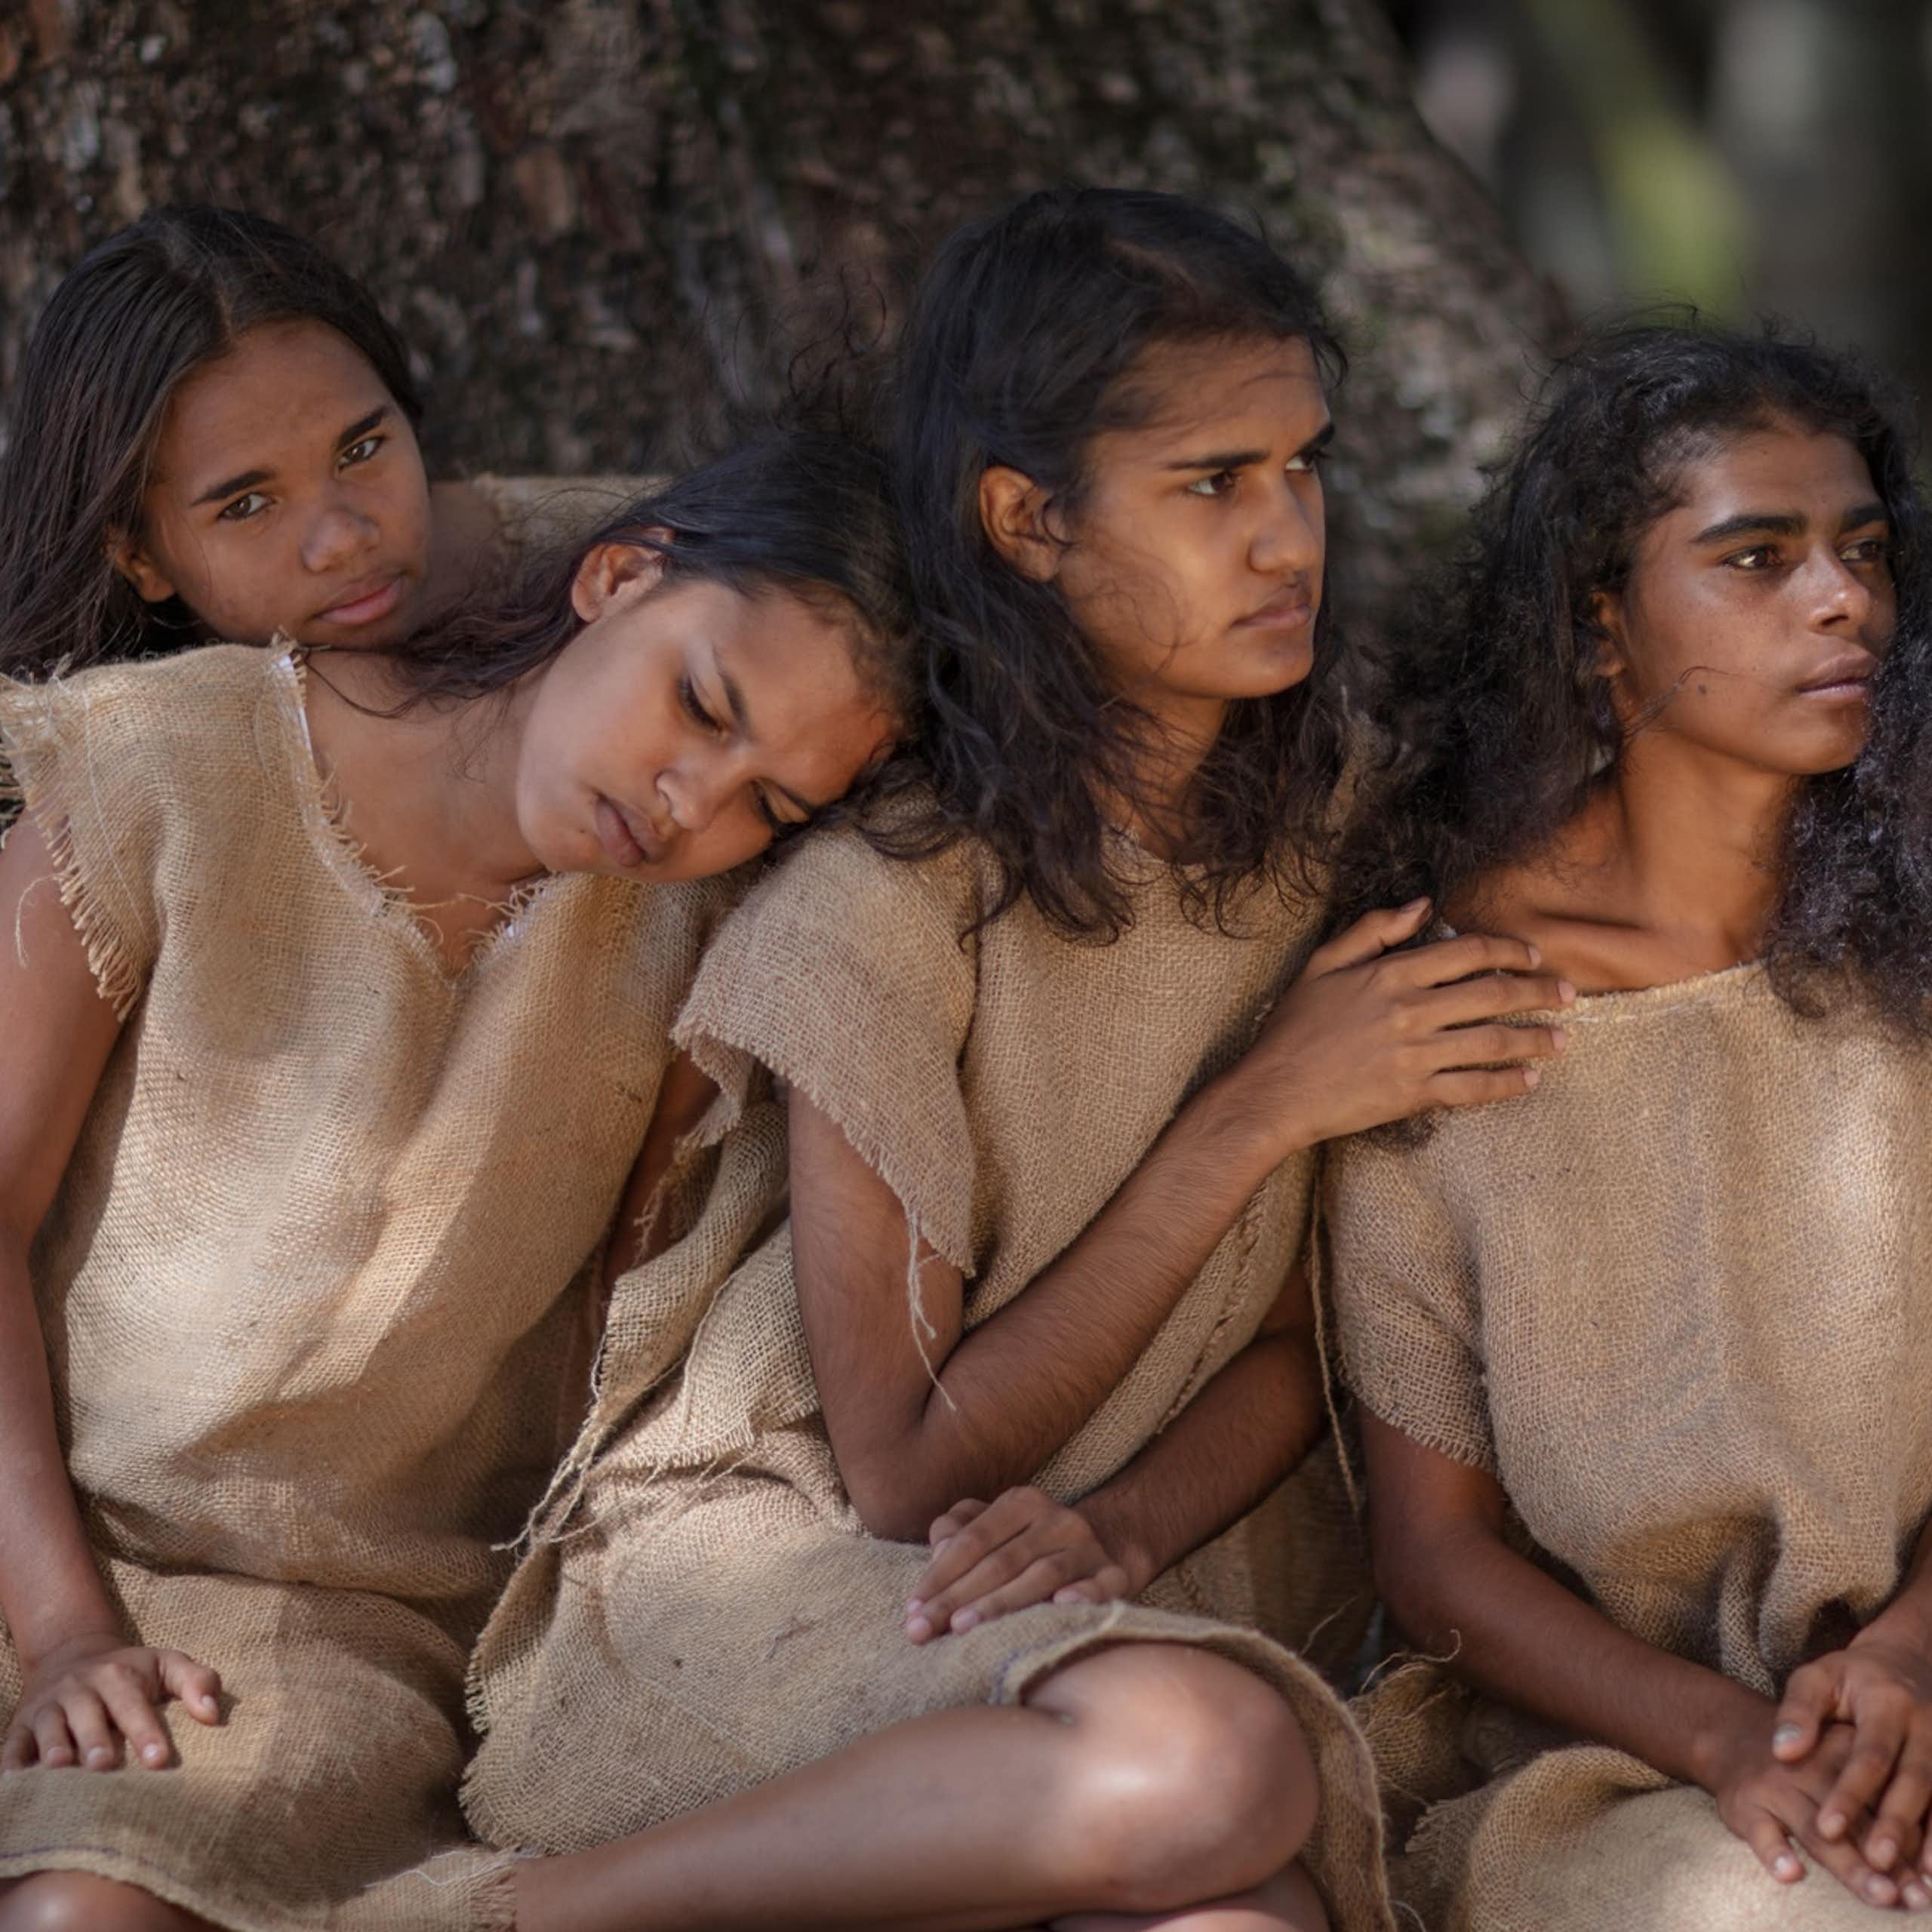 Four young Aboriginal women in dresses made from hessian